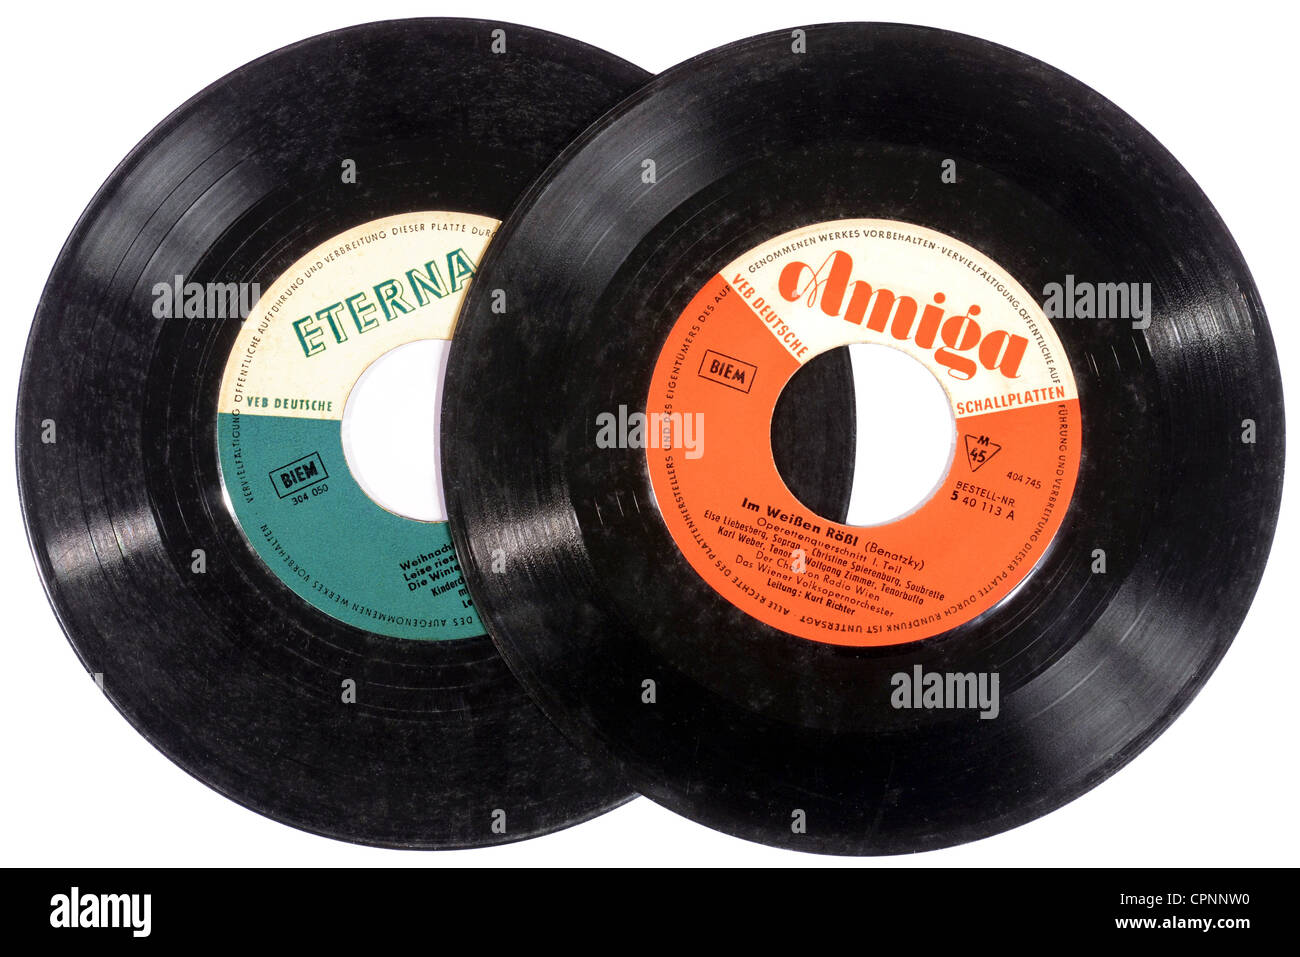 music, two records, record label Eterna, VEB Deutsche Schallplatten, Amiga,  "Im Weissen Roessl", single, vinyl, slightly damaged, East-Germany, circa  1960, Additional-Rights-Clearences-Not Available Stock Photo - Alamy